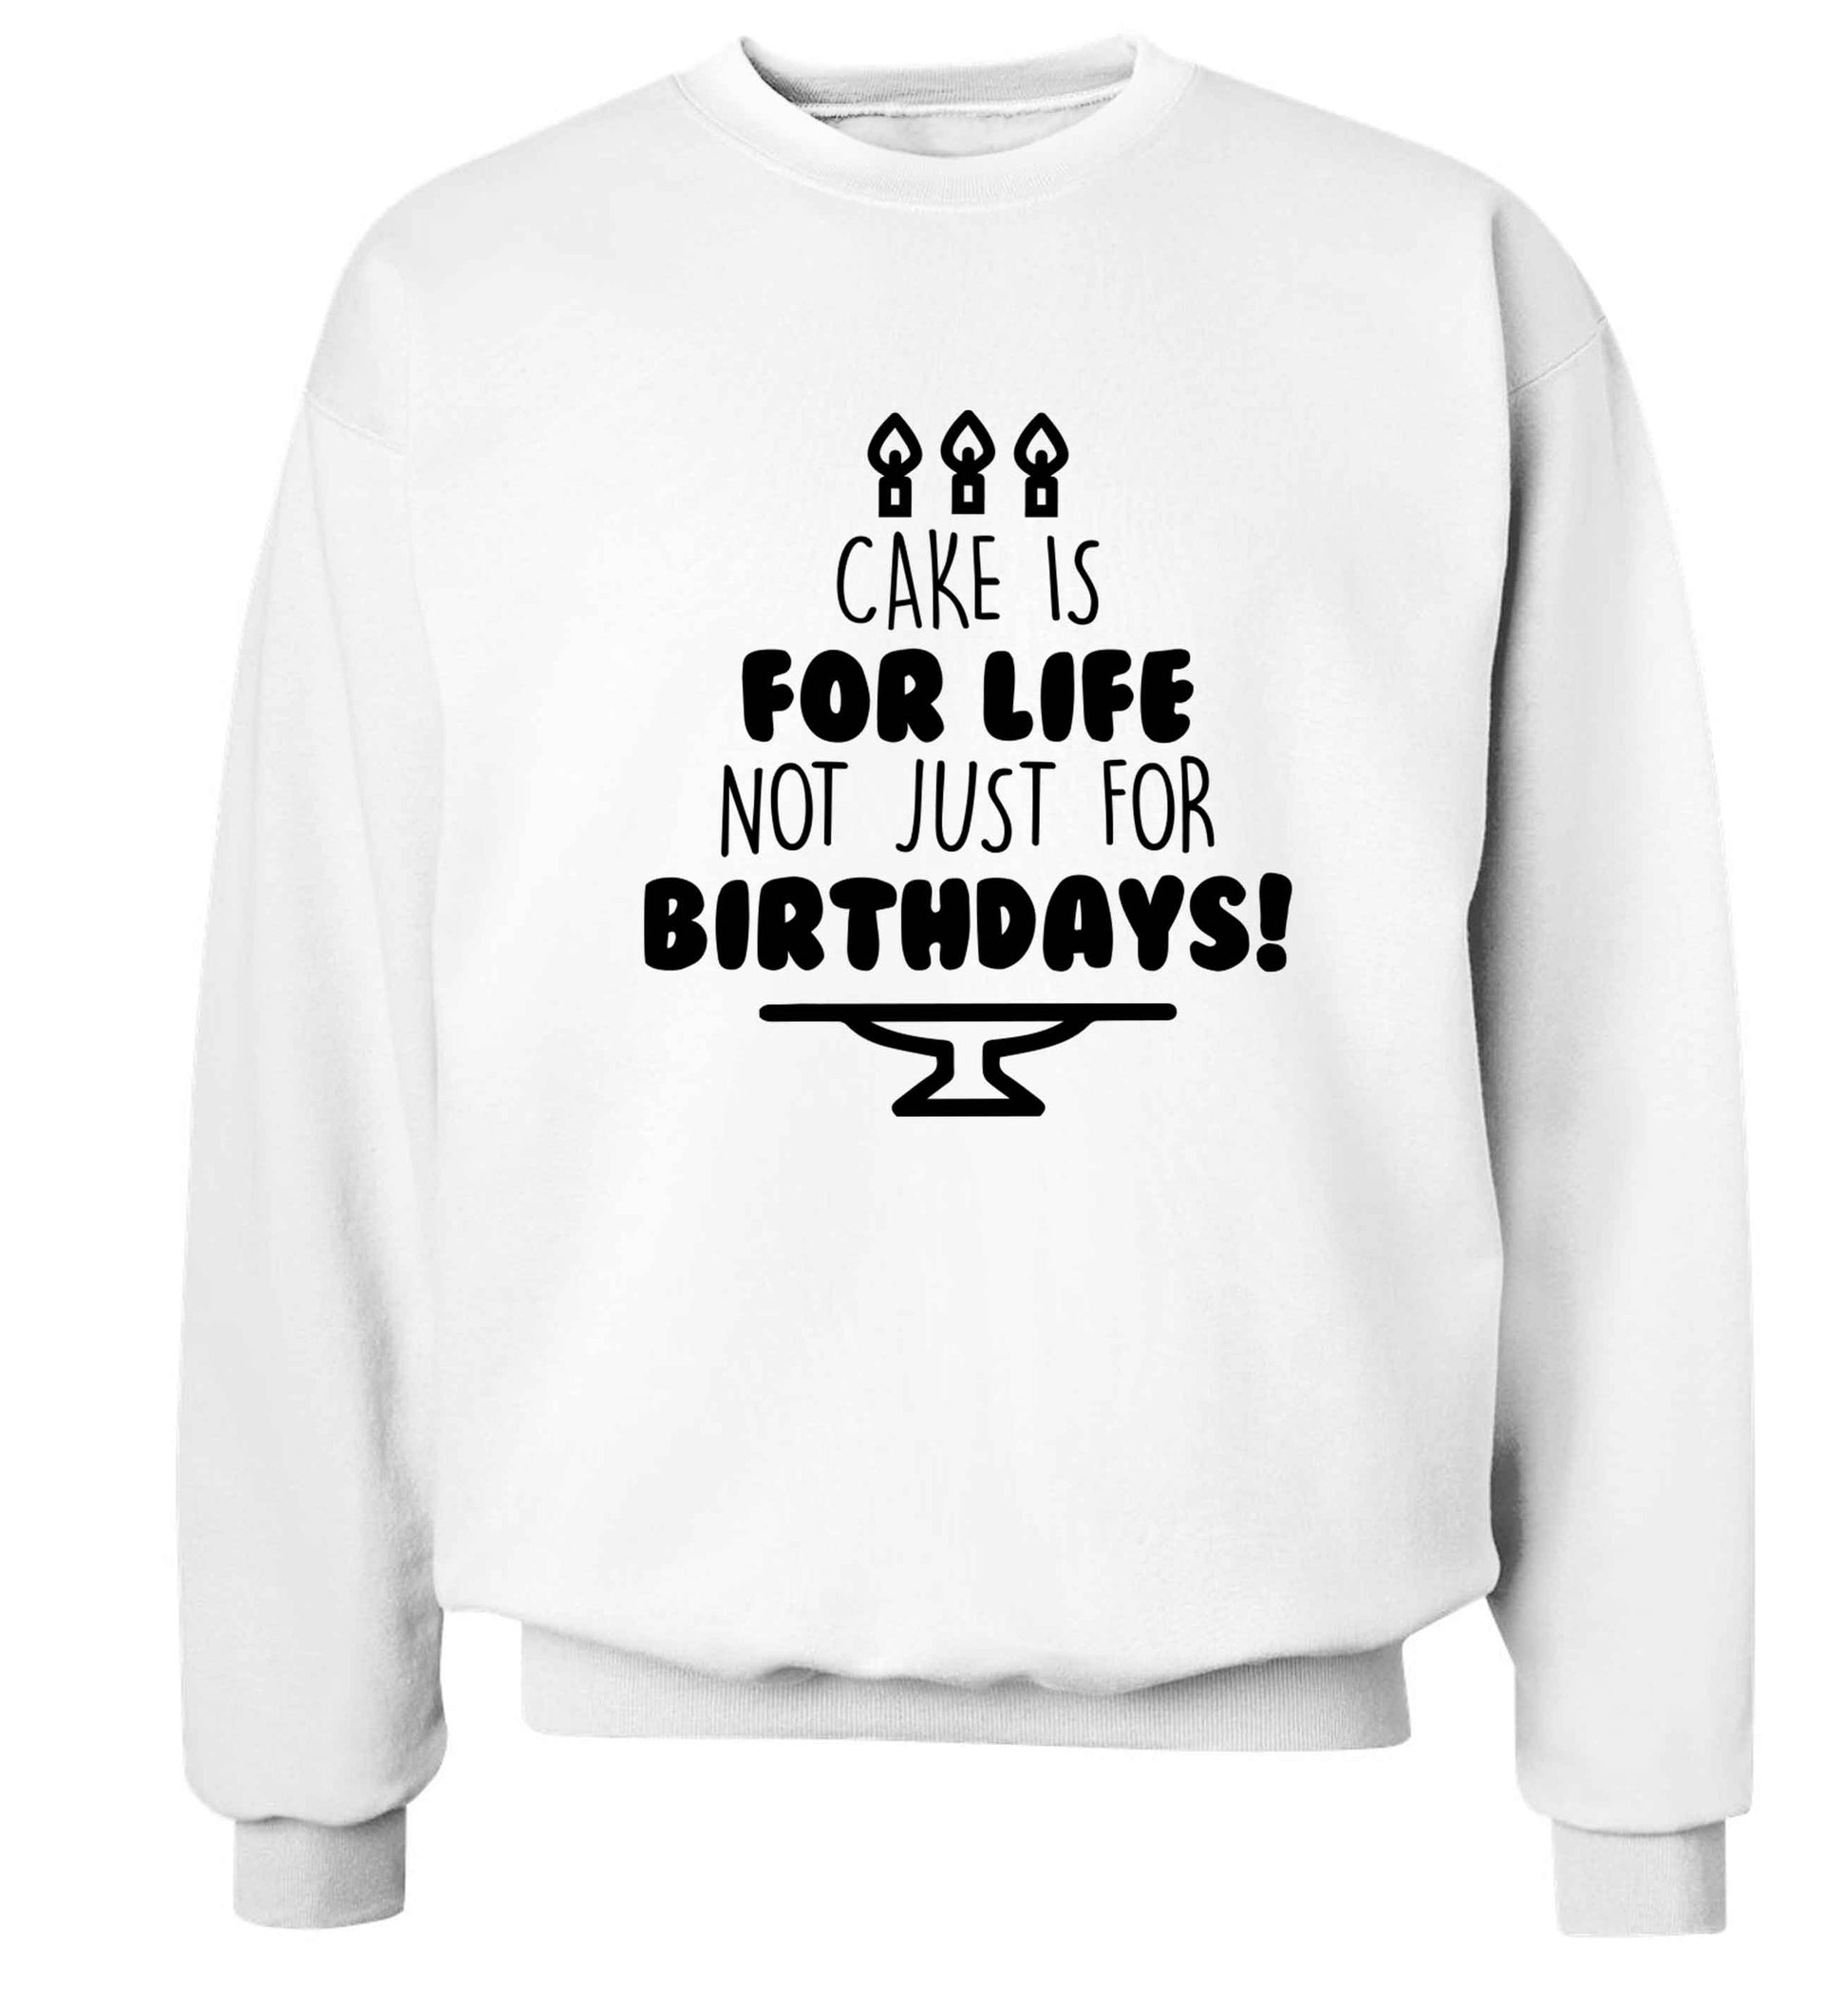 Cake is for life not just for birthdays Adult's unisex white Sweater 2XL